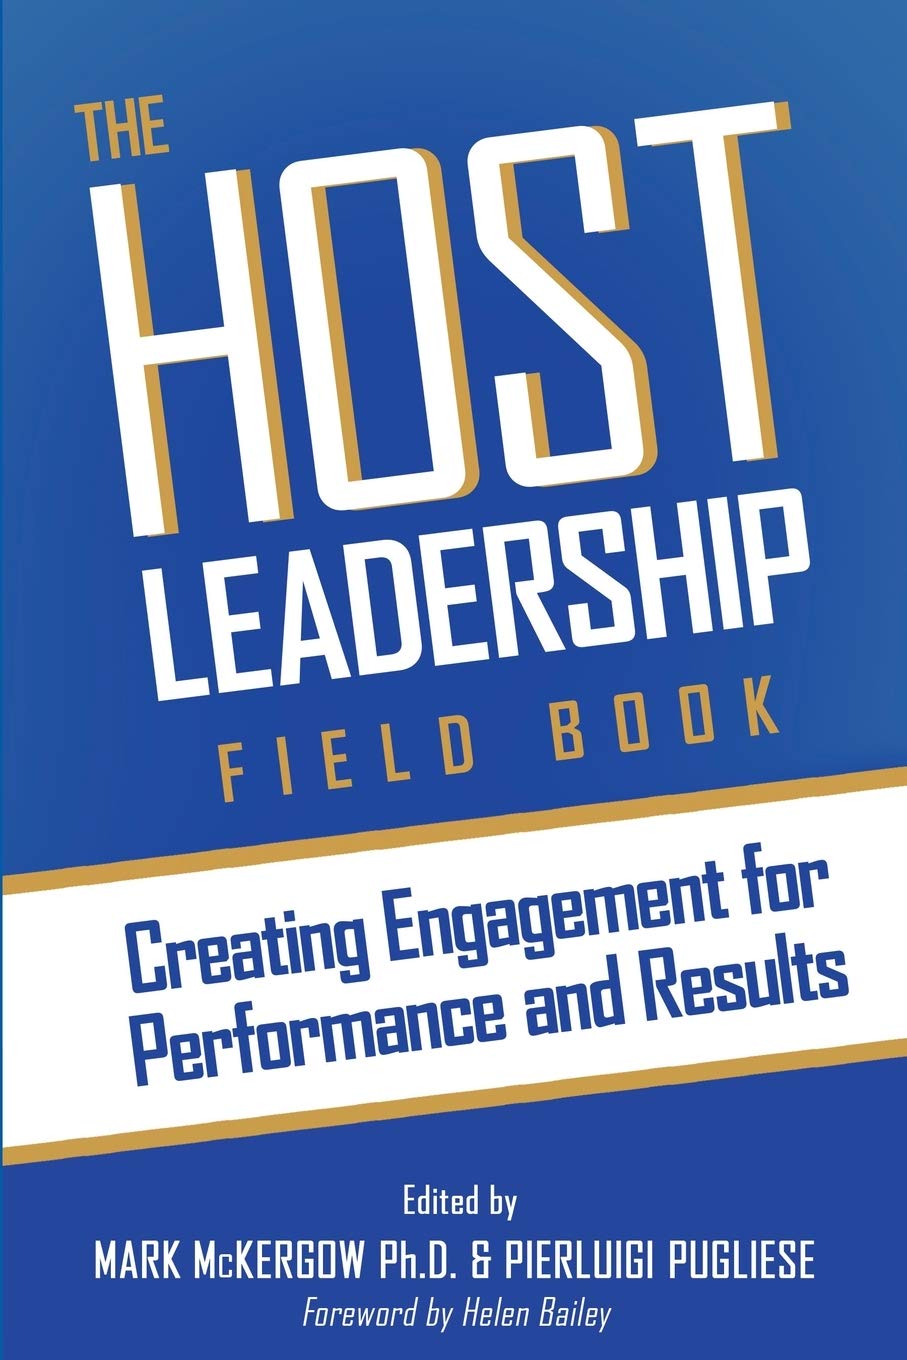 The Host Leadership Field Book: Building Engagement For Performance And Results